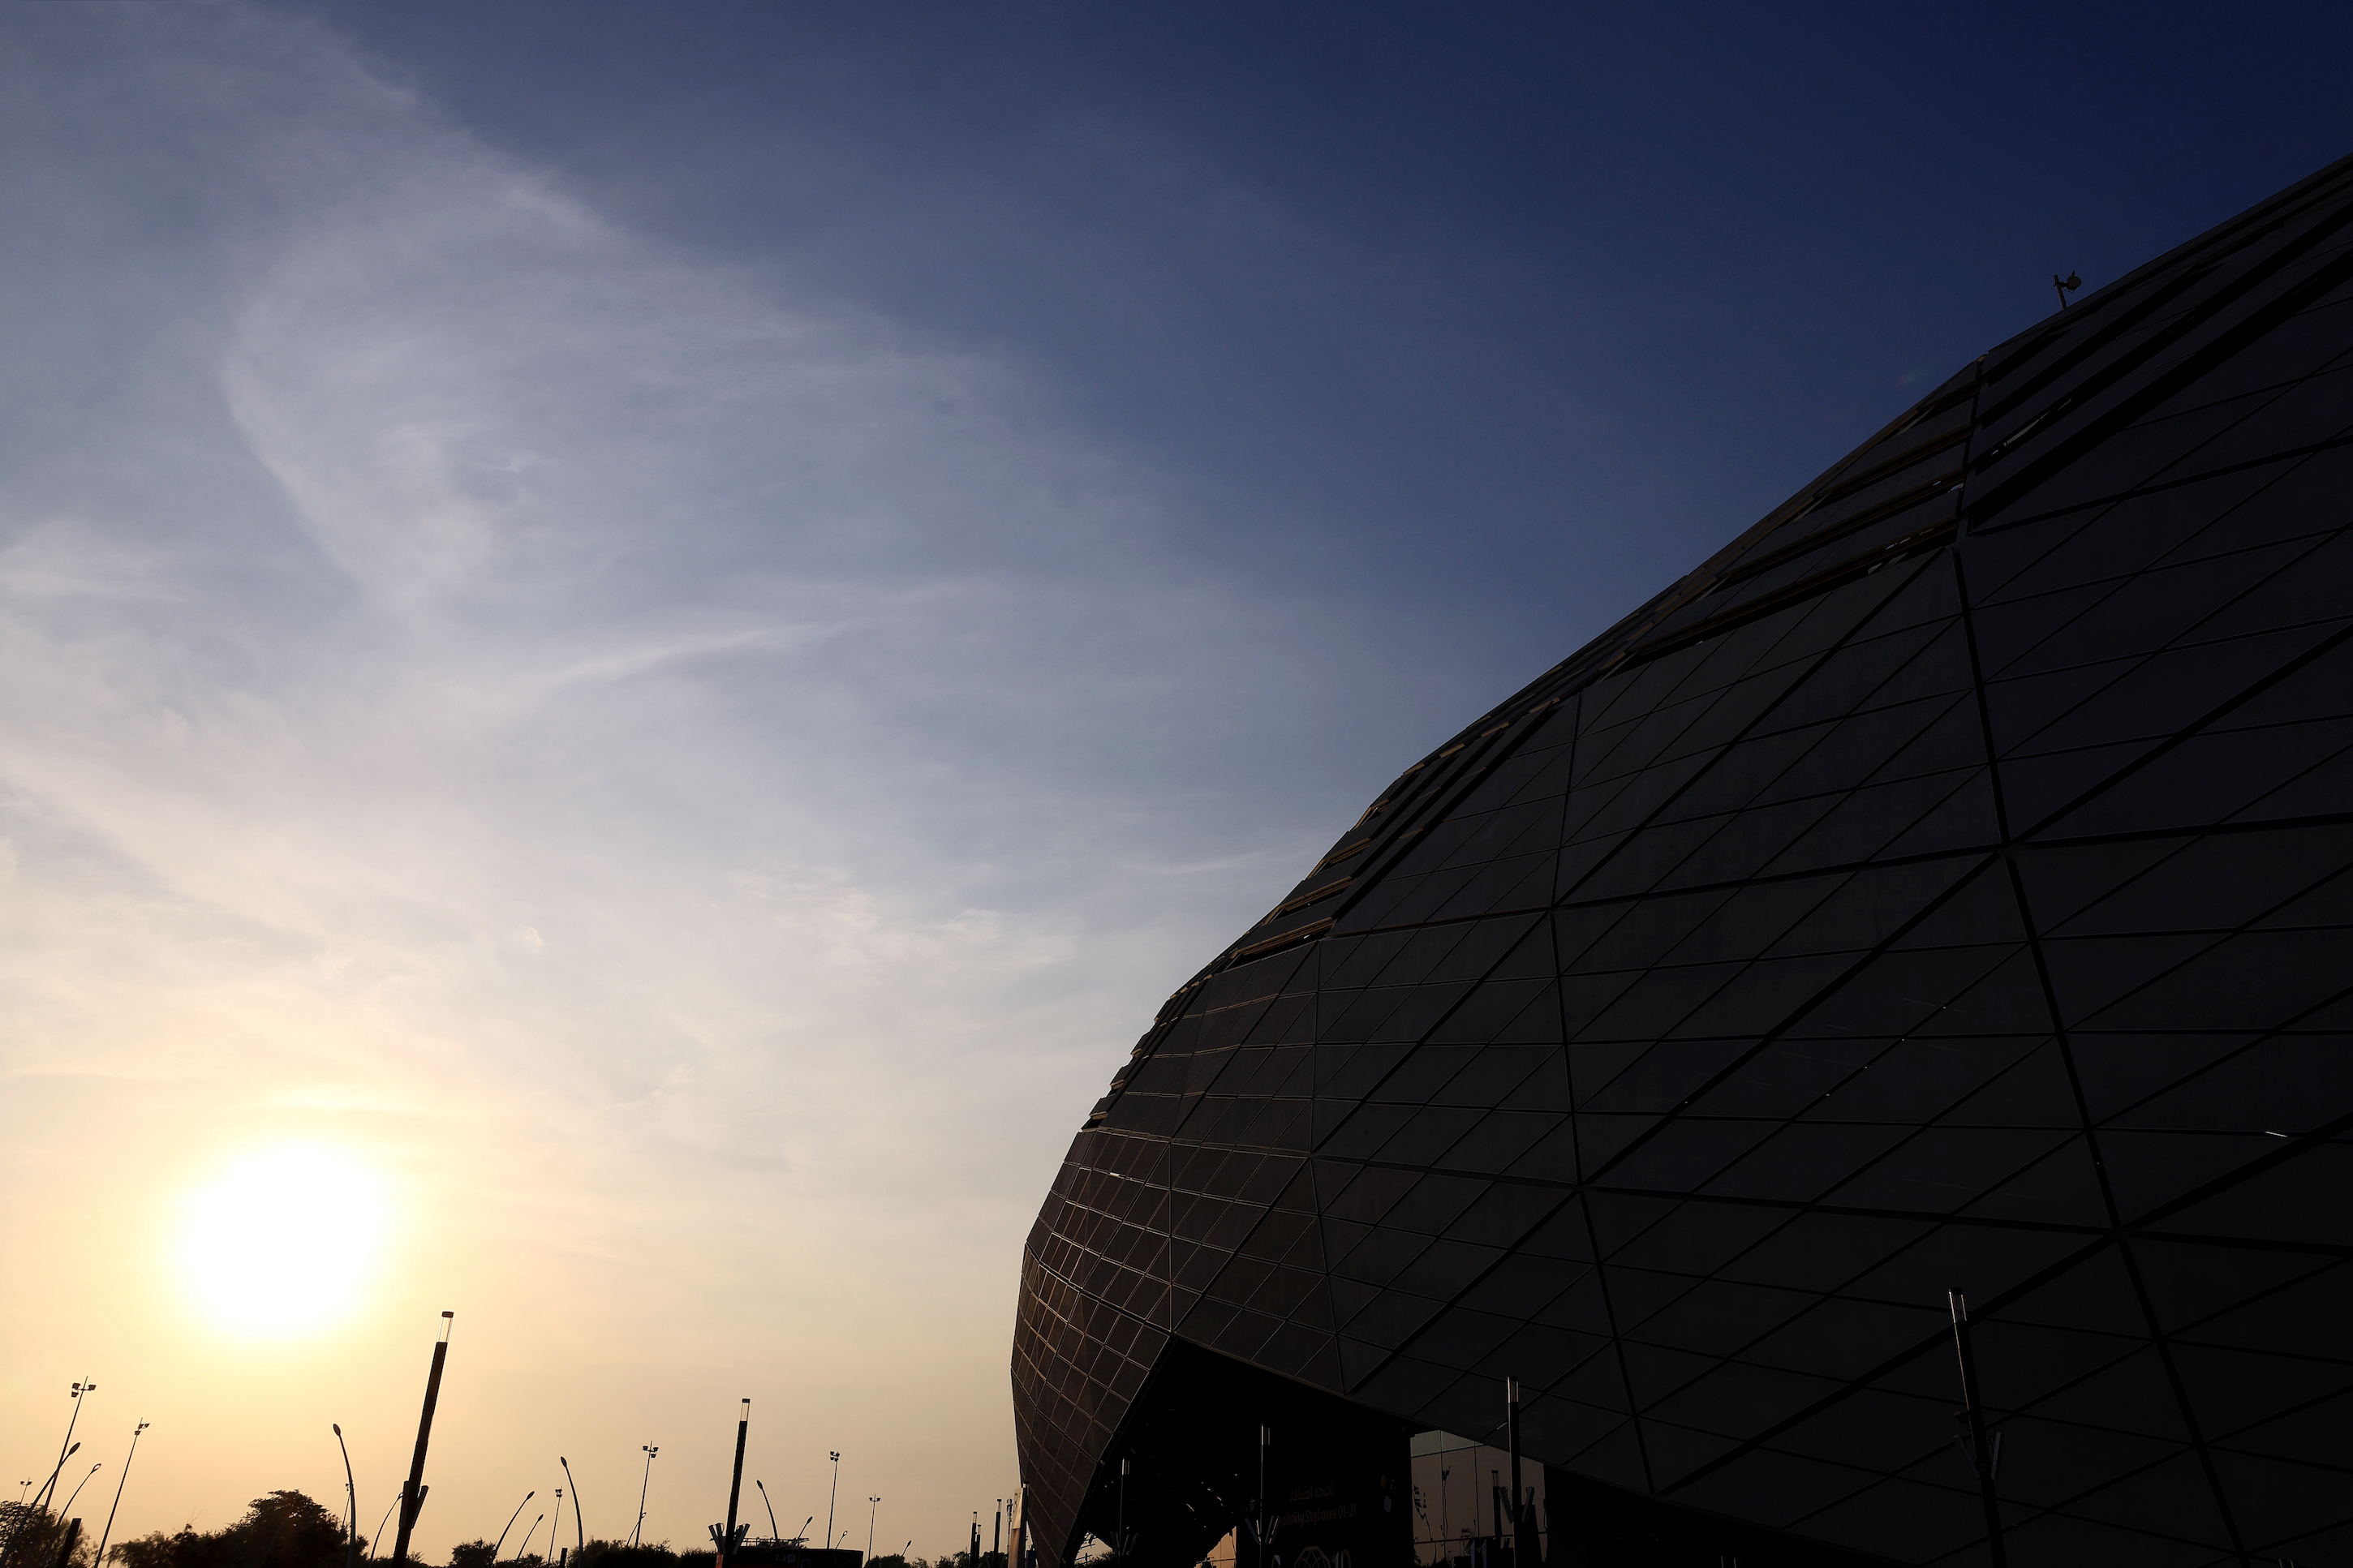 AL RAYYAN, QATAR - NOVEMBER 30: General view outside the stadium prior to the FIFA World Cup Qatar 2022 Group D match between Tunisia and France at Education City Stadium on November 30, 2022 in Al Rayyan, Qatar. (Photo by Buda Mendes/Getty Images)